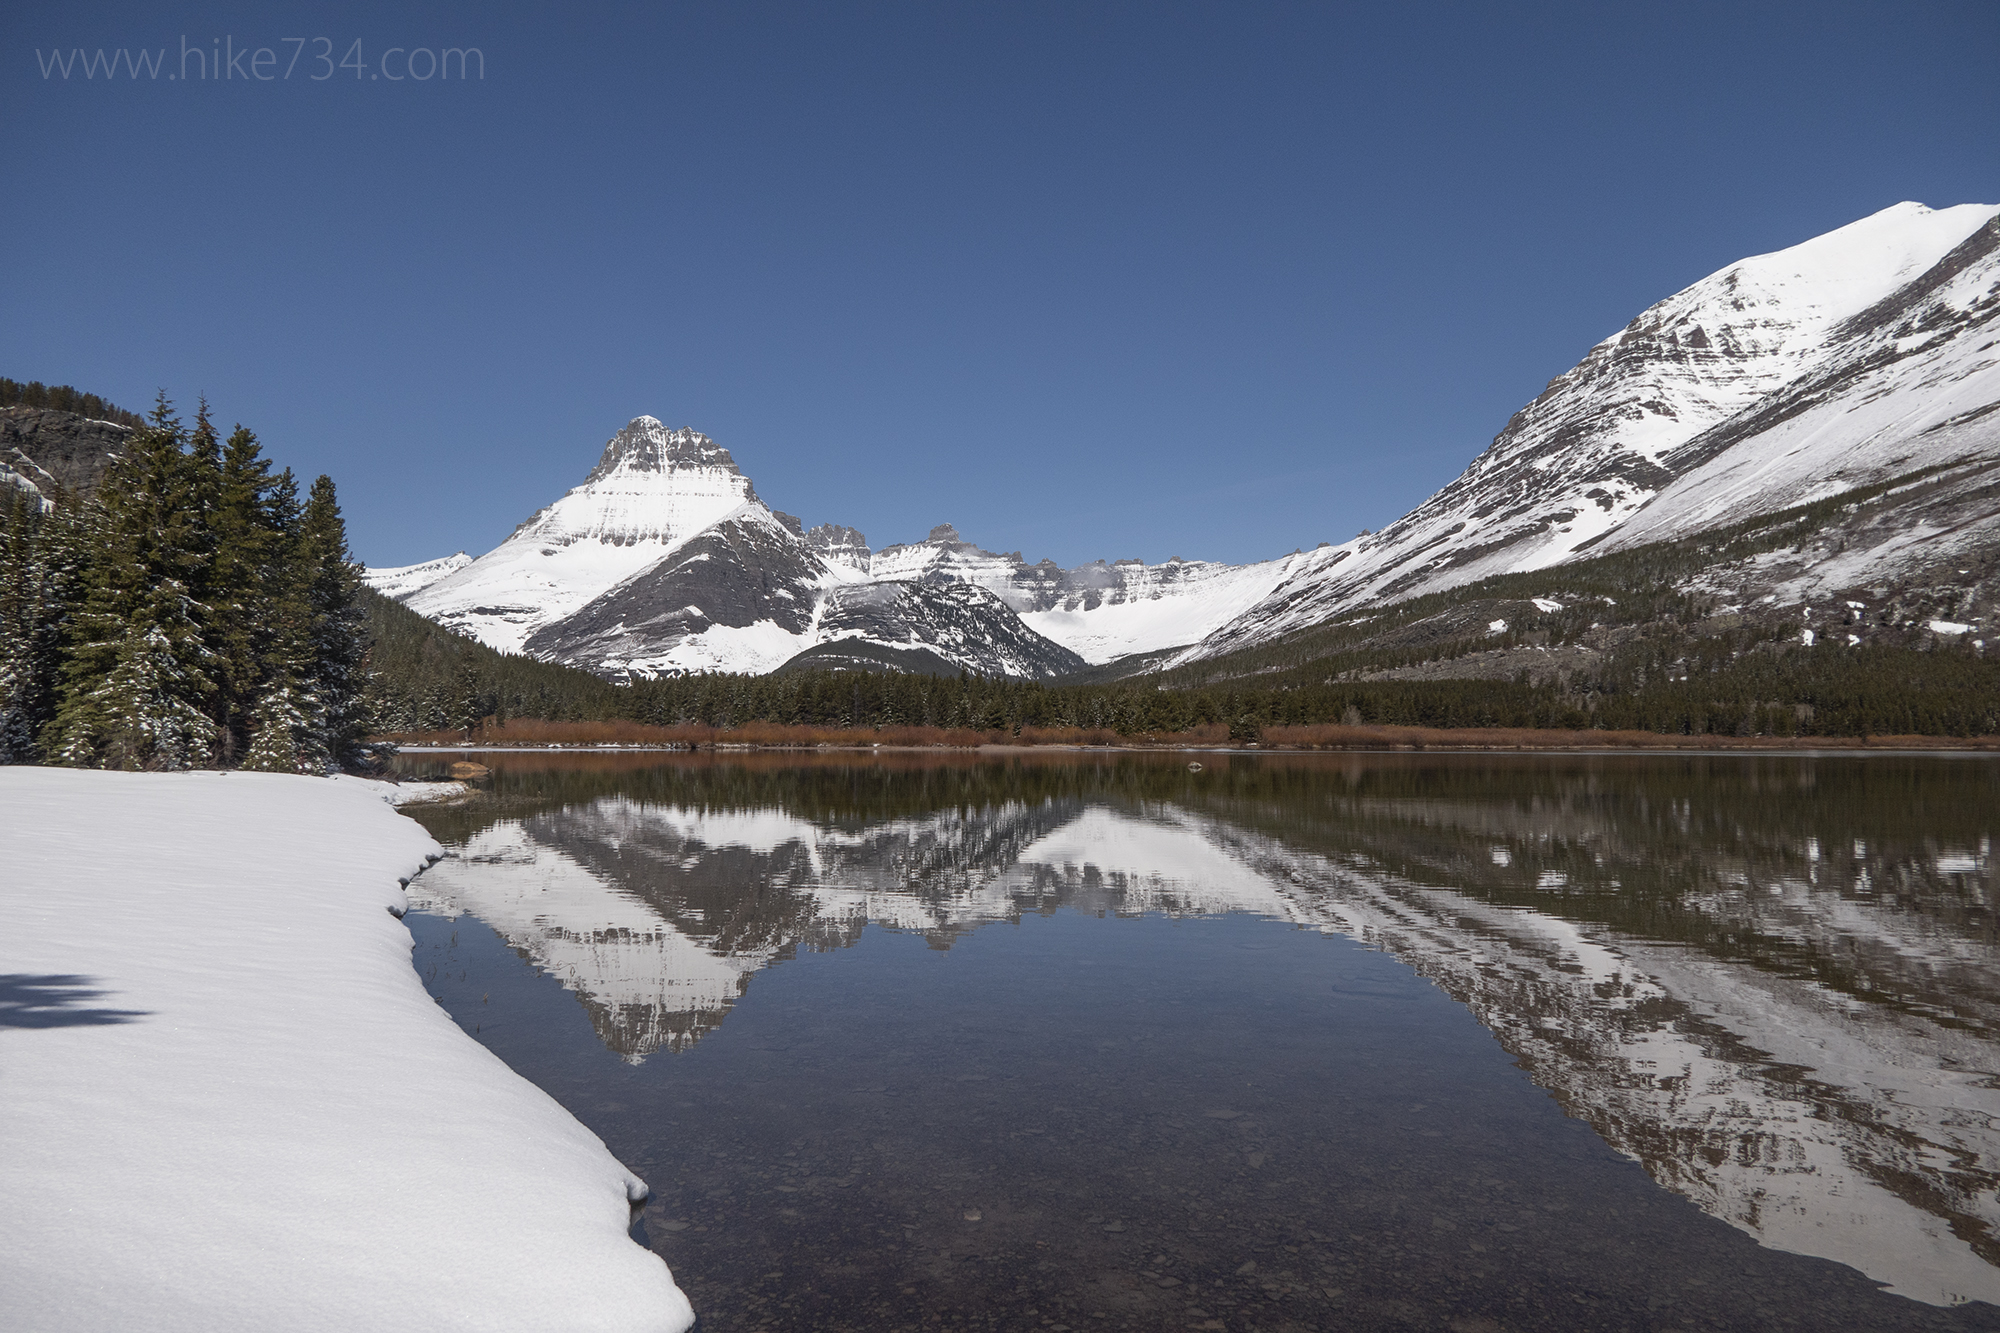 Grinnell Lake – Spring 2019